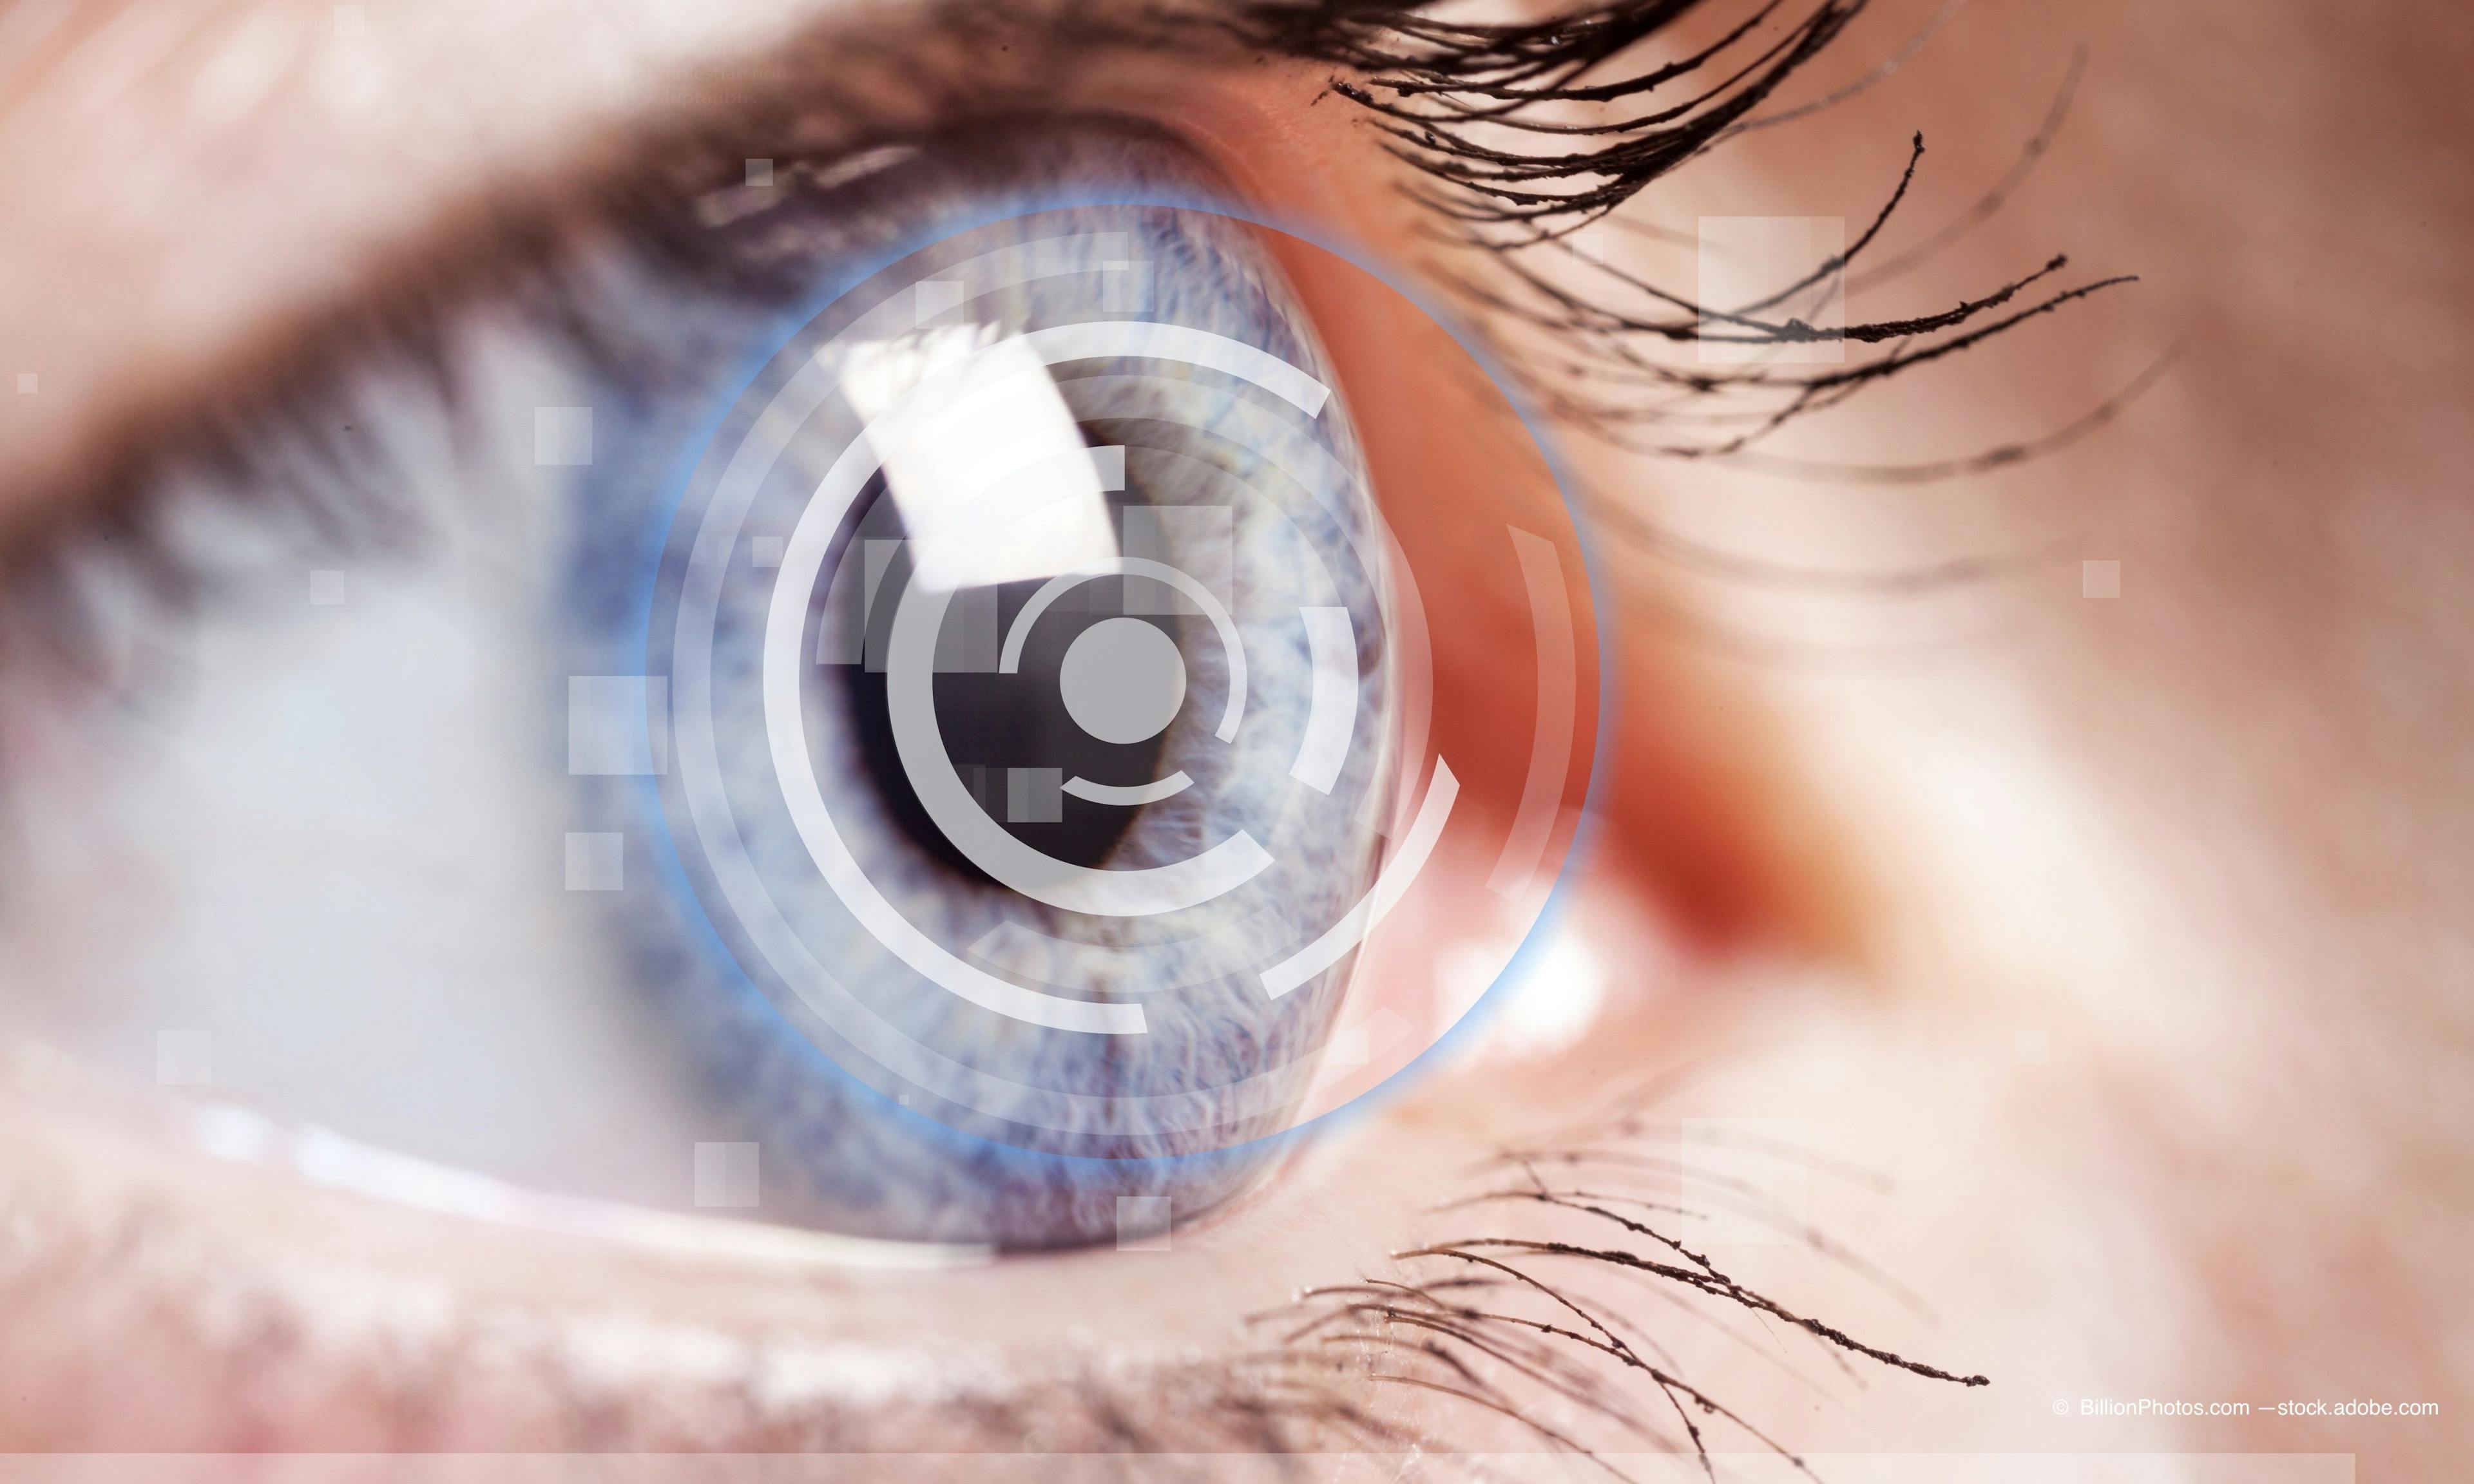 Physicians measure contrast sensitivity in patients with cataract